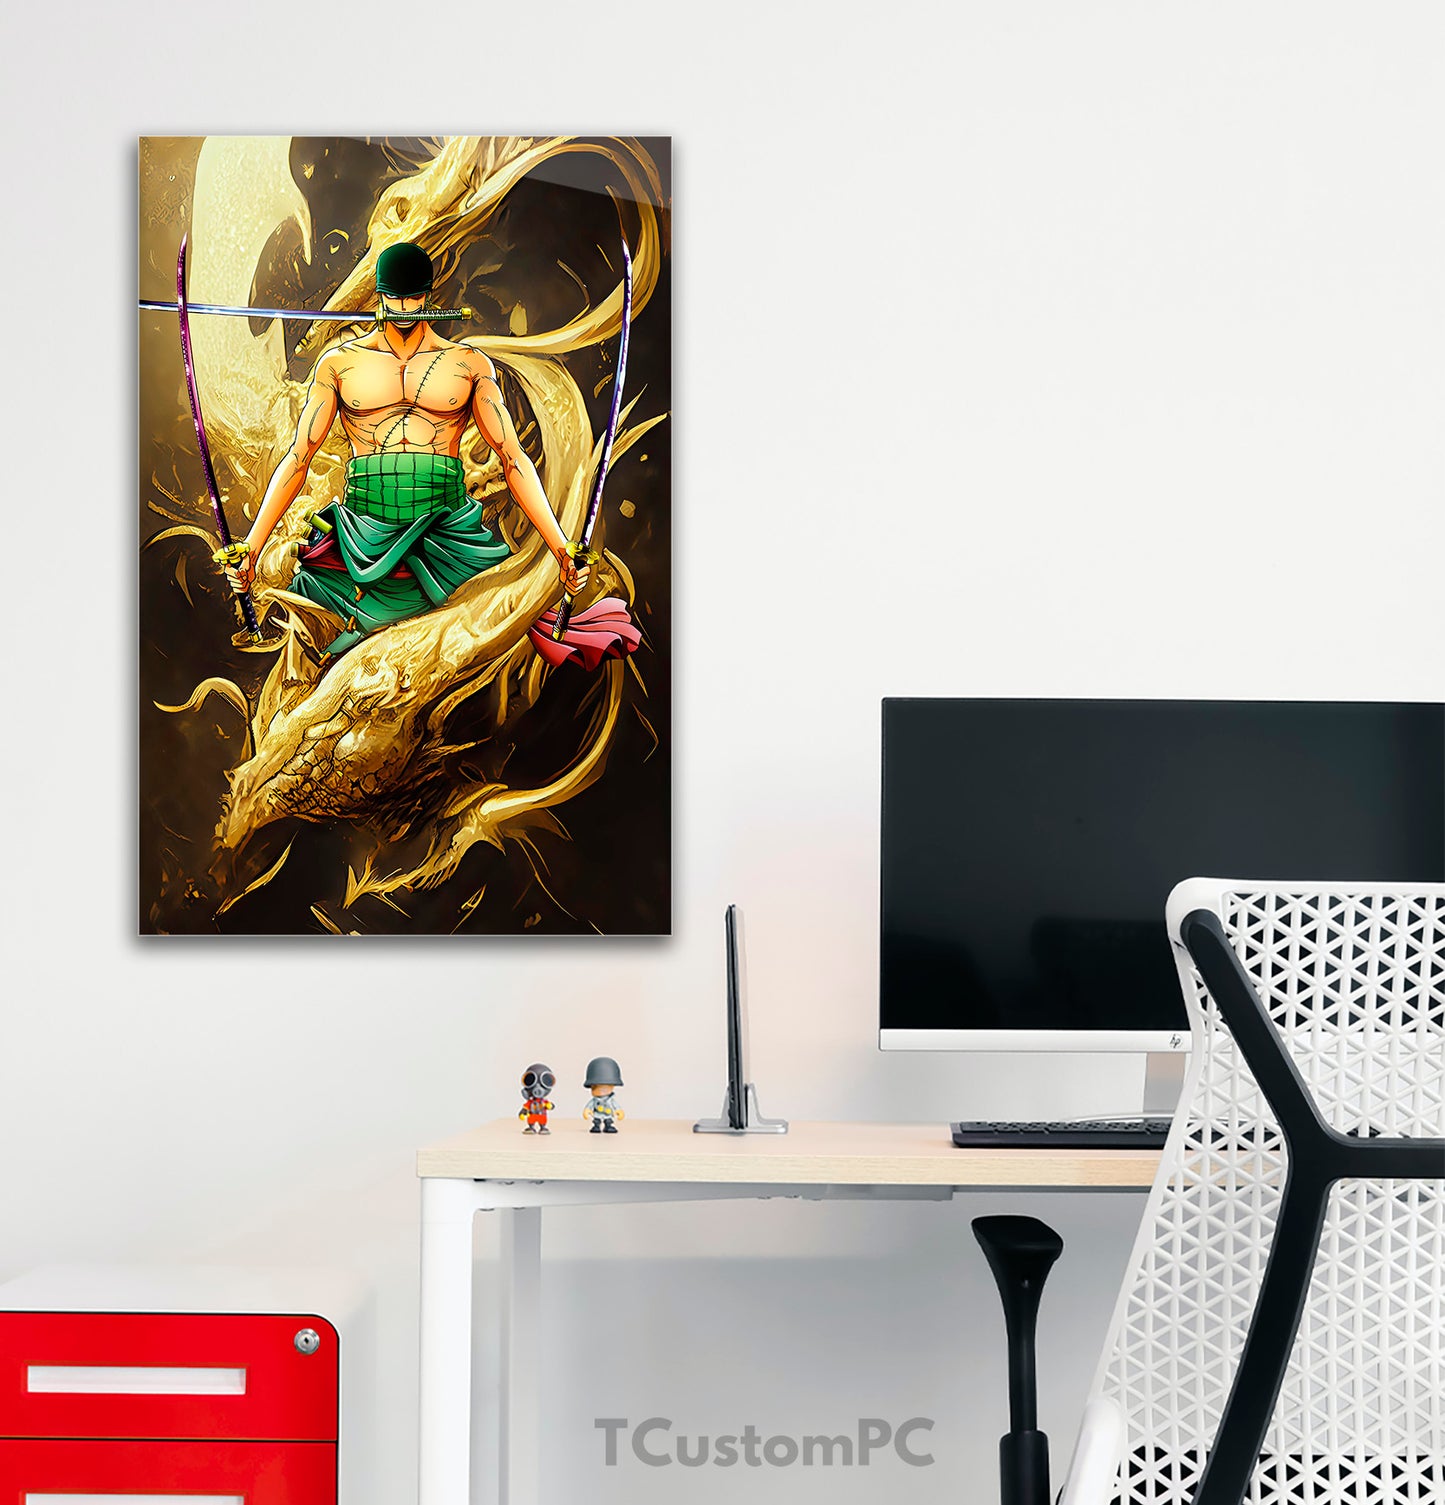 One piece Zoro painting "ultra gold ultimate"